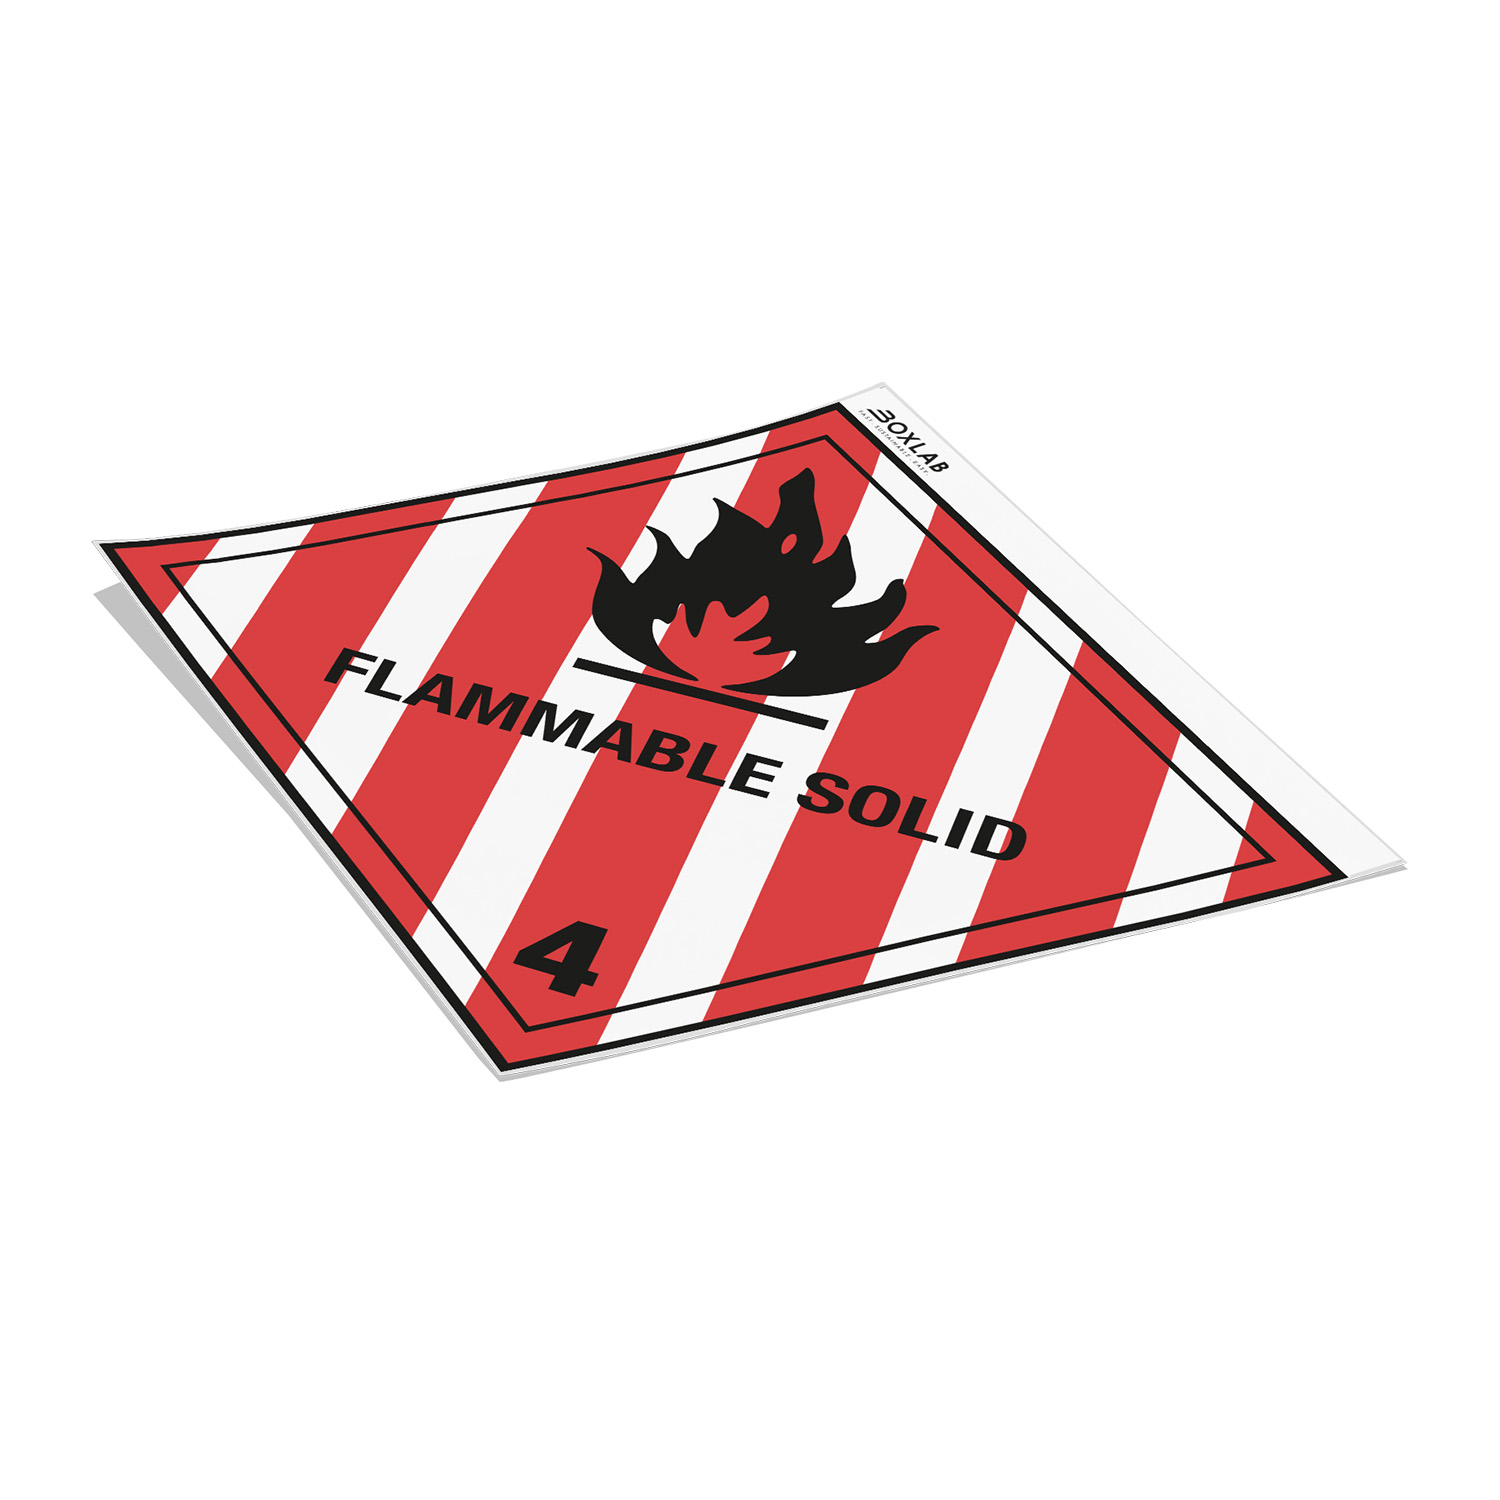 Placard Cl. 4.1, Flammable Solid, 250x250mm, 1 pc per sheet